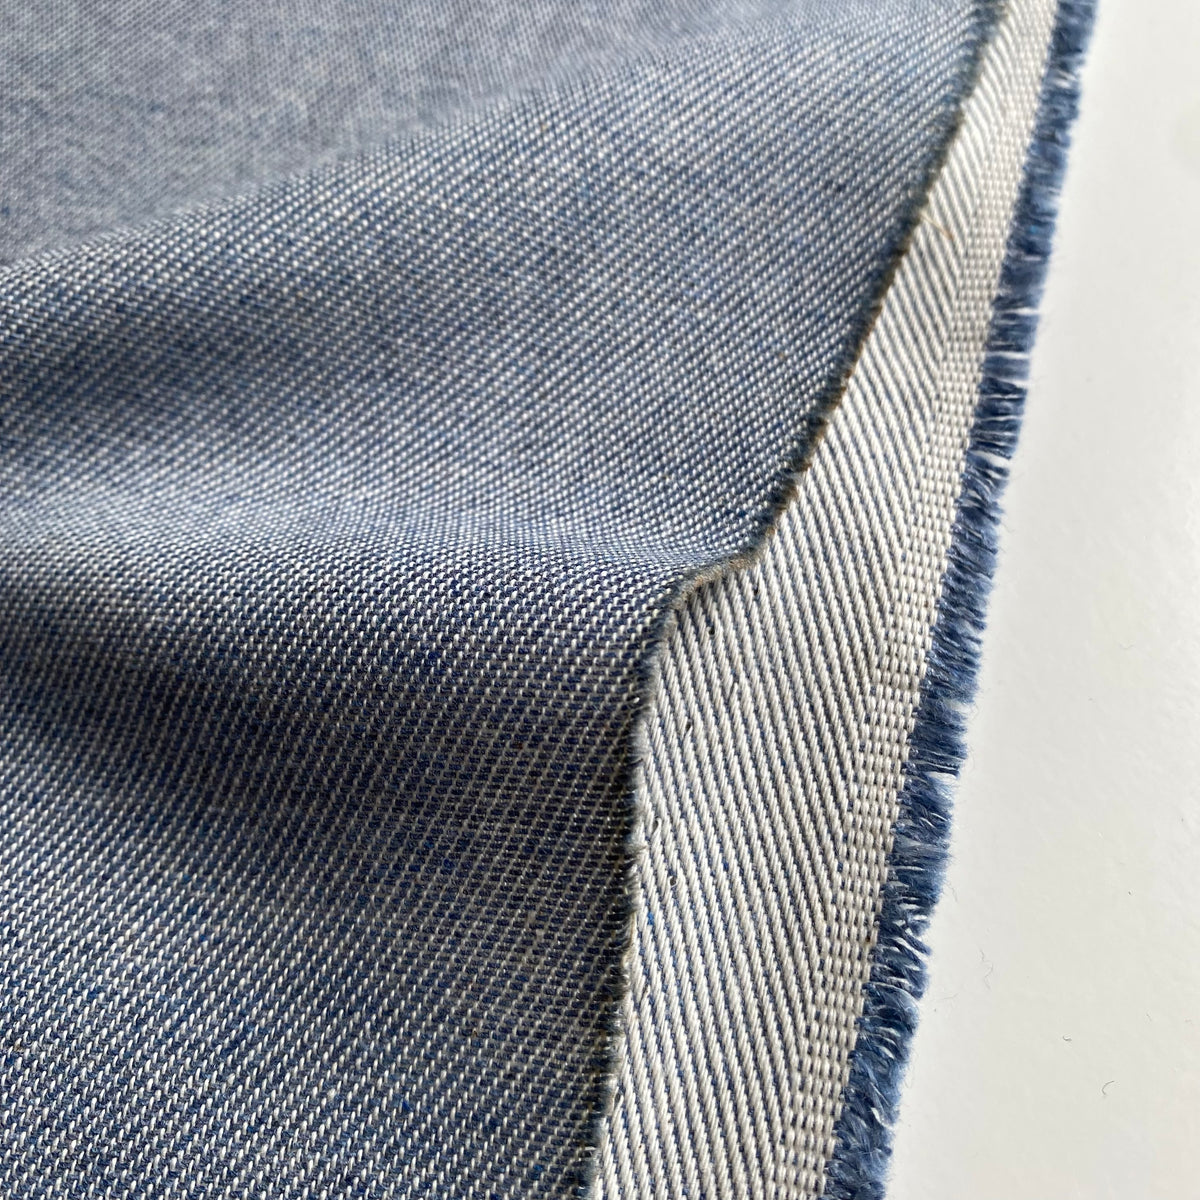 Recycled Denim Canvas Fabric - Blue - Priced per 0.5 metre